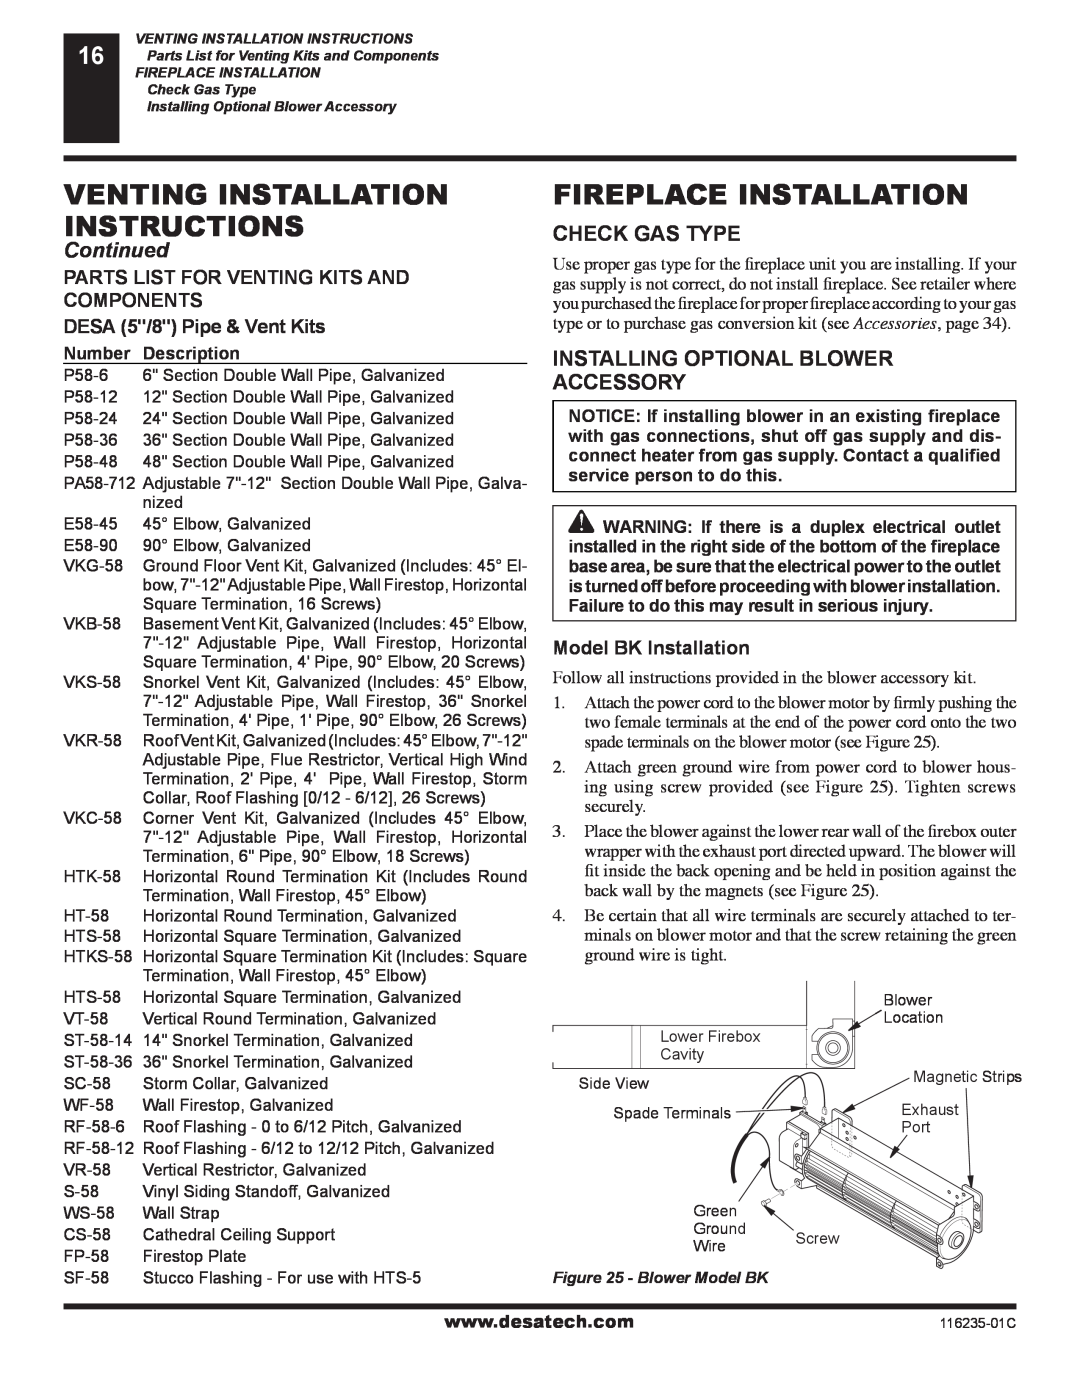 Desa (V)VC36NE, (V)VC36PE Venting Installation, Instructions, Continued, Parts List For Venting Kits And, Components 